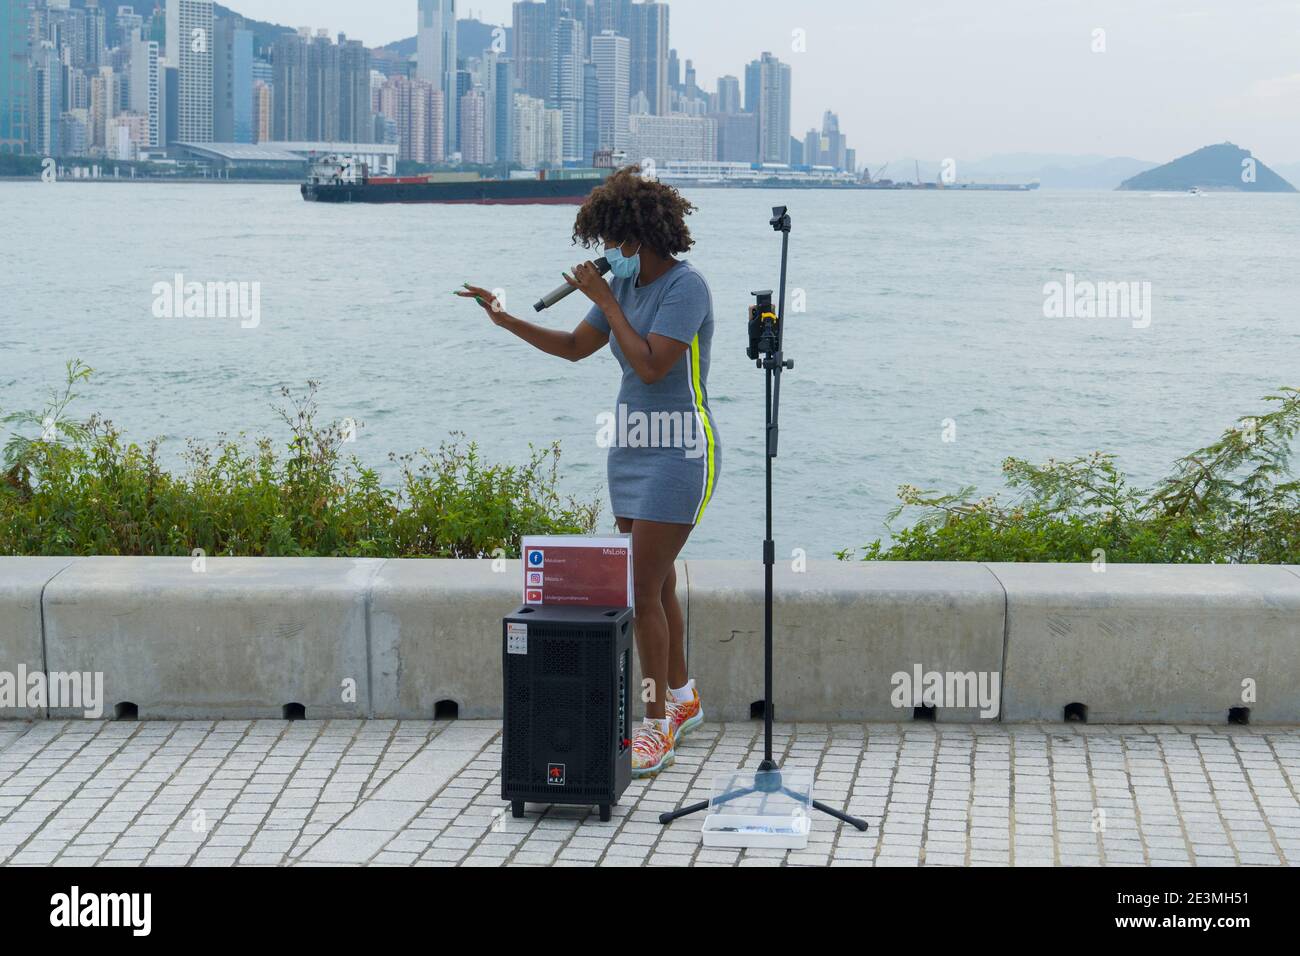 Hong Kong November 29 2020 : Woman Street Performer Wearing Mask and Singing in West Kowloon Culture District during Coronavirus (COVID-19) outbreak Stock Photo